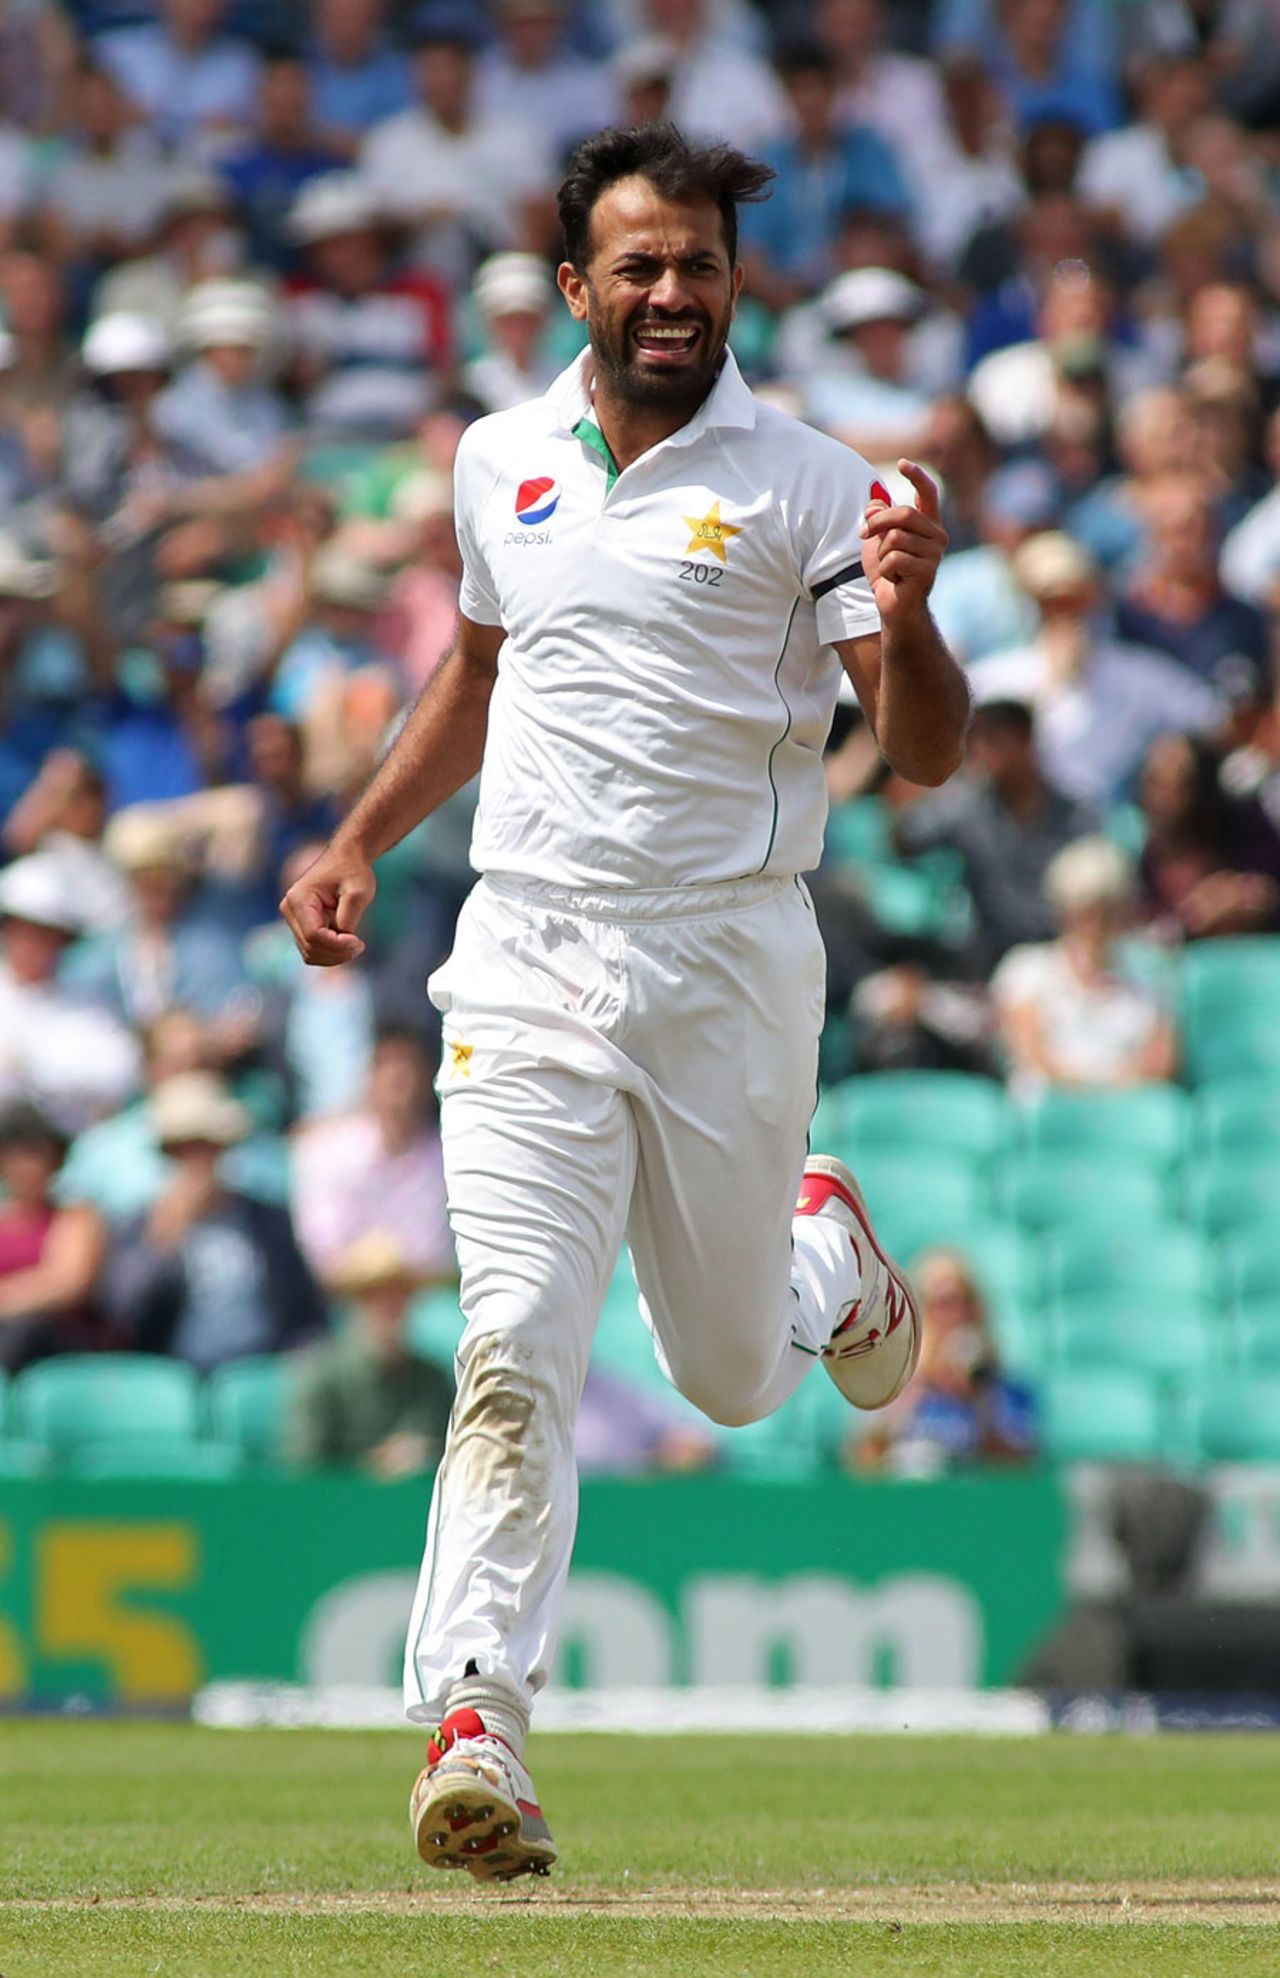 Wahab Riaz thought he had another only to be denied by a no-ball, England v Pakistan, 4th Test, The Oval, 1st day, August 11, 2016